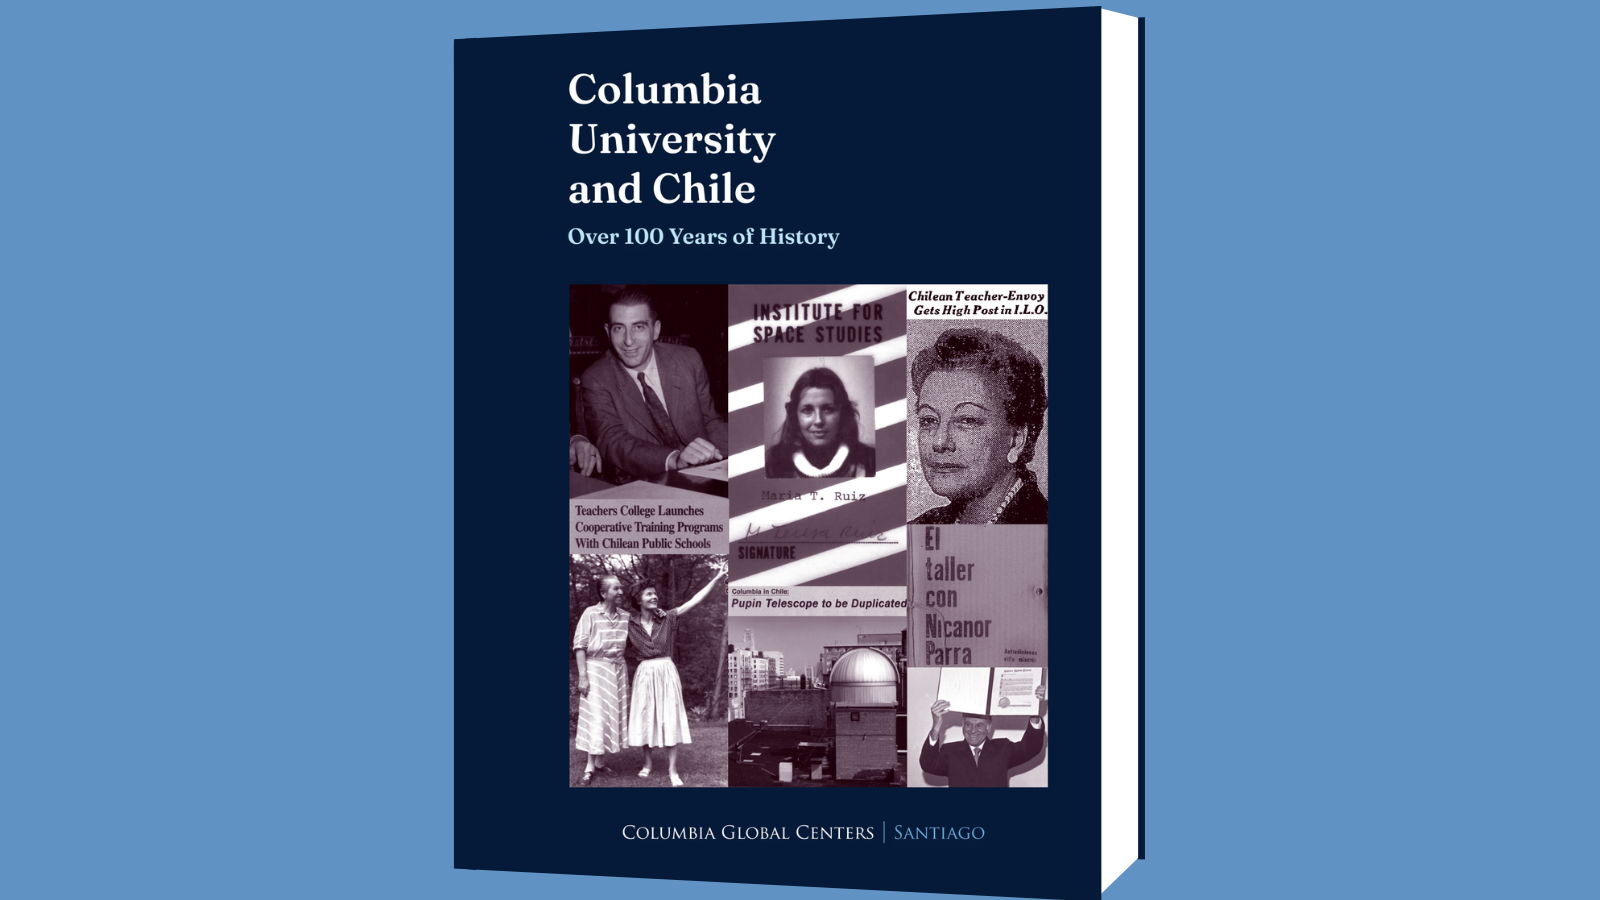 Columbia University and Chile: Over 100 Years of History